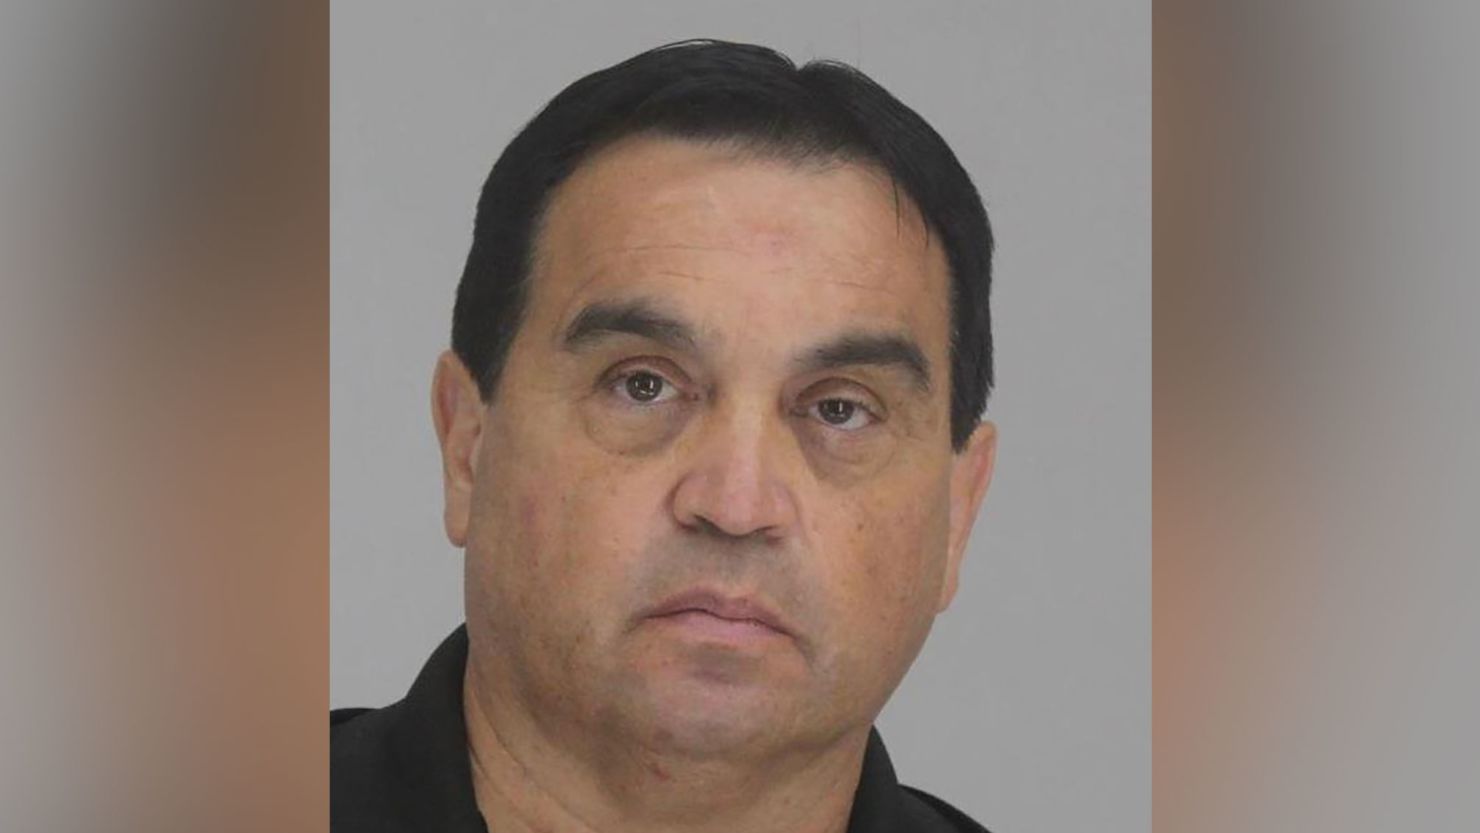 Raynaldo Rivera Ortiz Jr., a 59-year-old doctor, was arrested for allegedly tampering with IV bags and causing the death of one coworker, according to authorities.